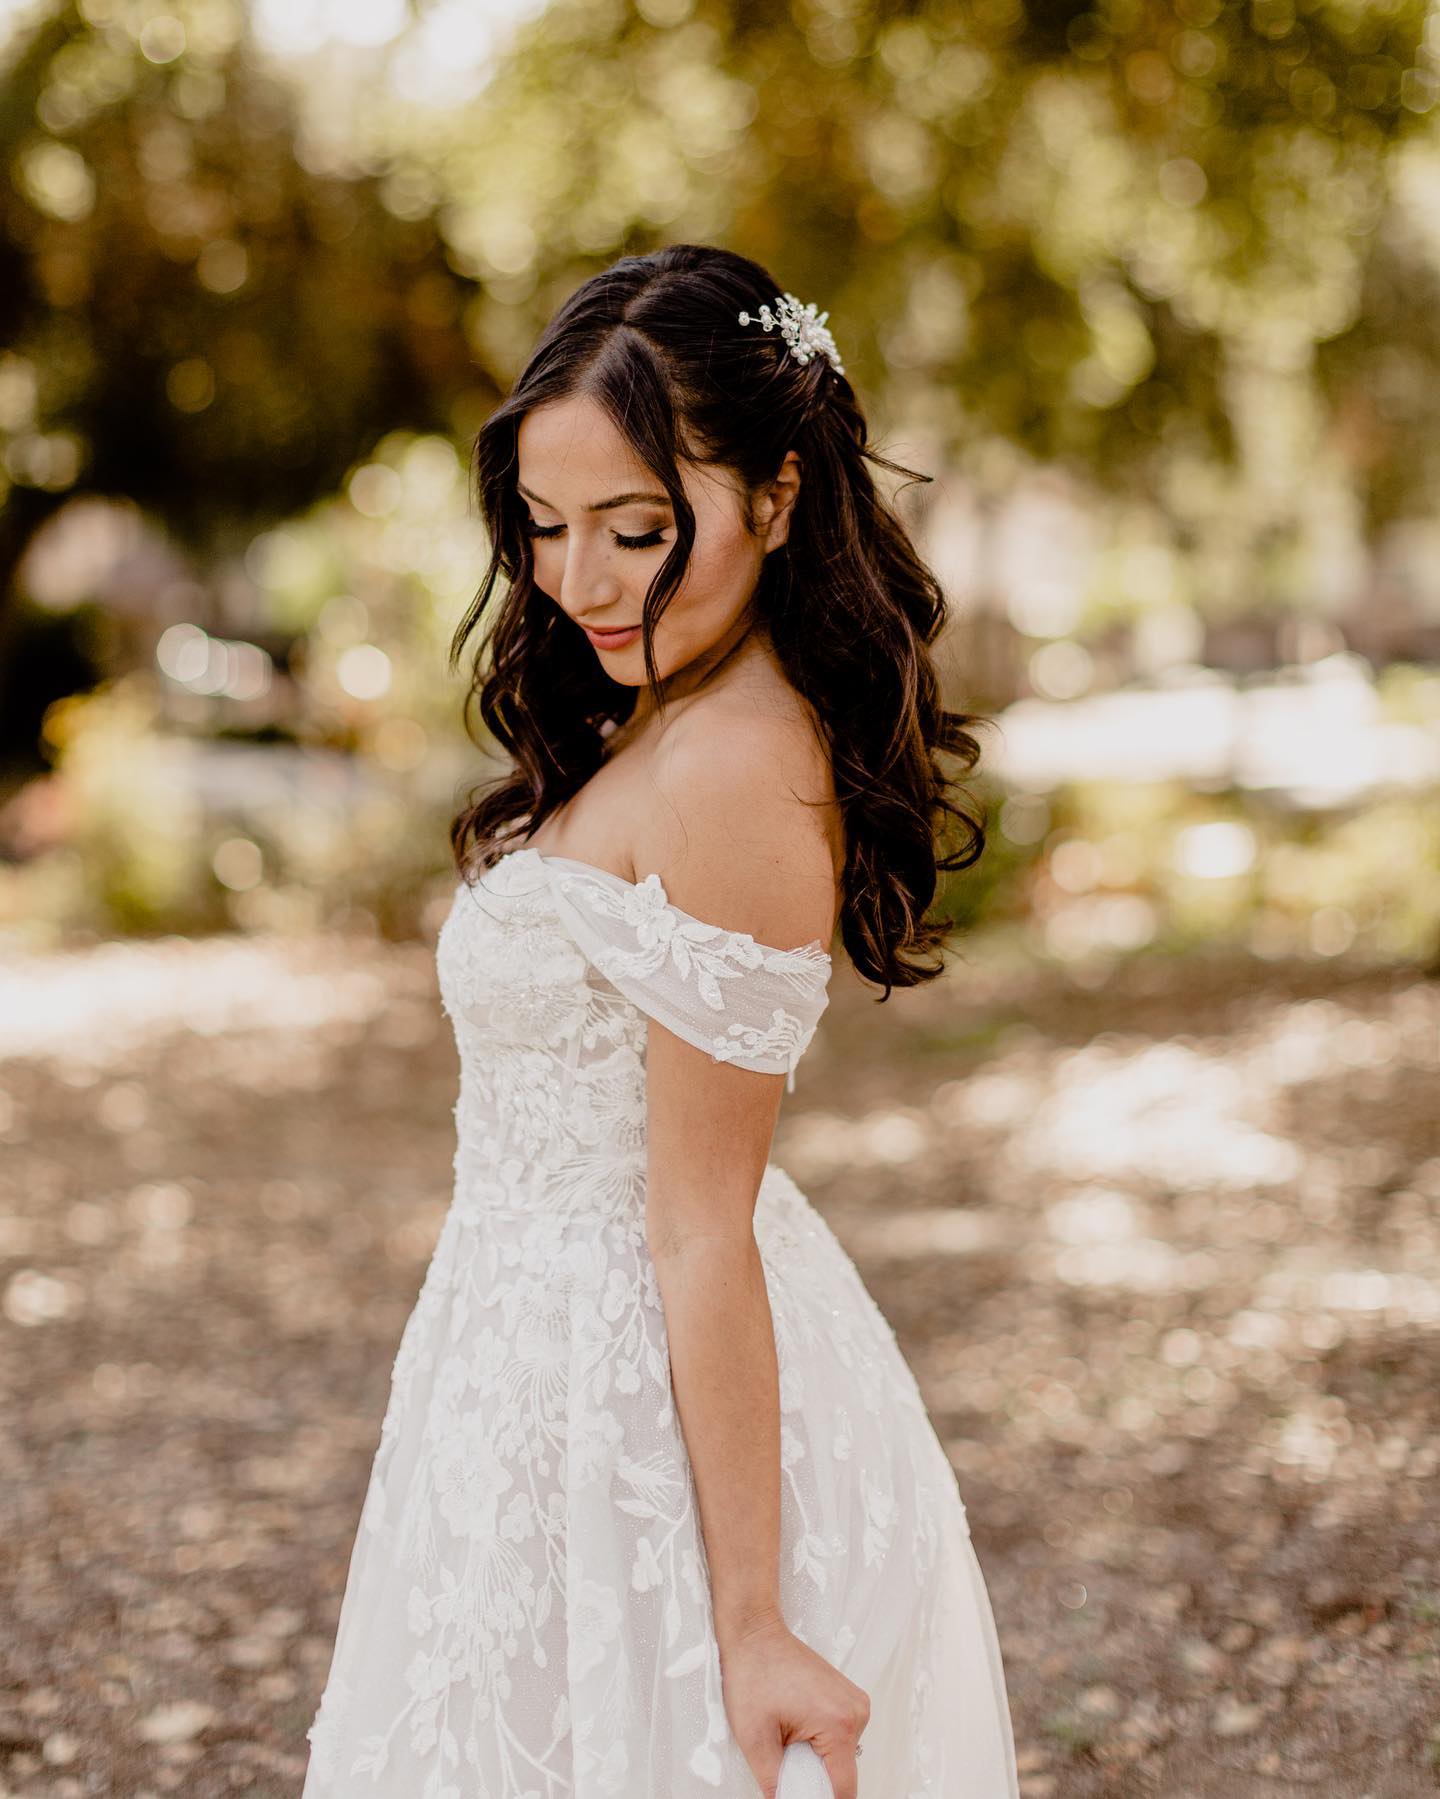 How To Customize Your Wedding Dress